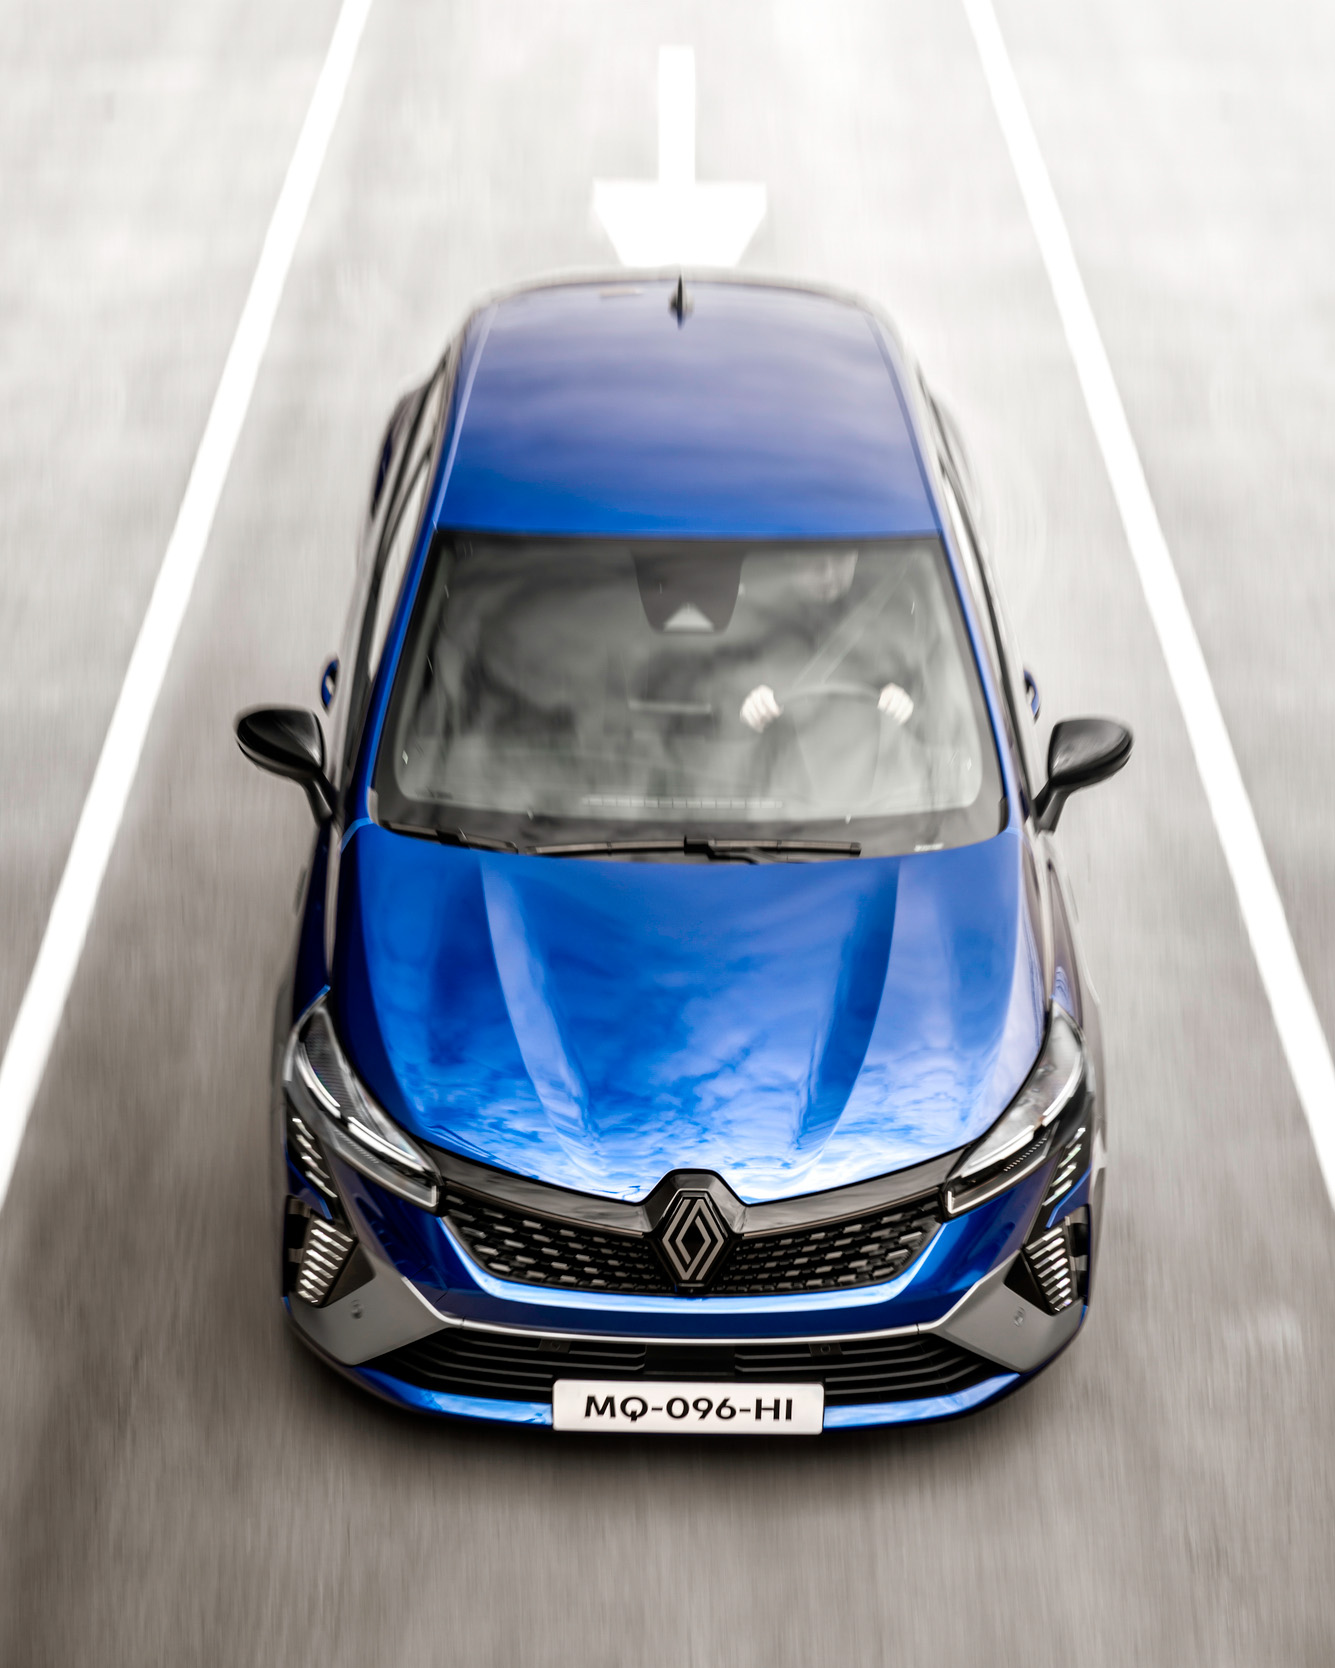 New Renault Clio: the standard-setting versatile city car ushers in a new  style - Site media global de Renault